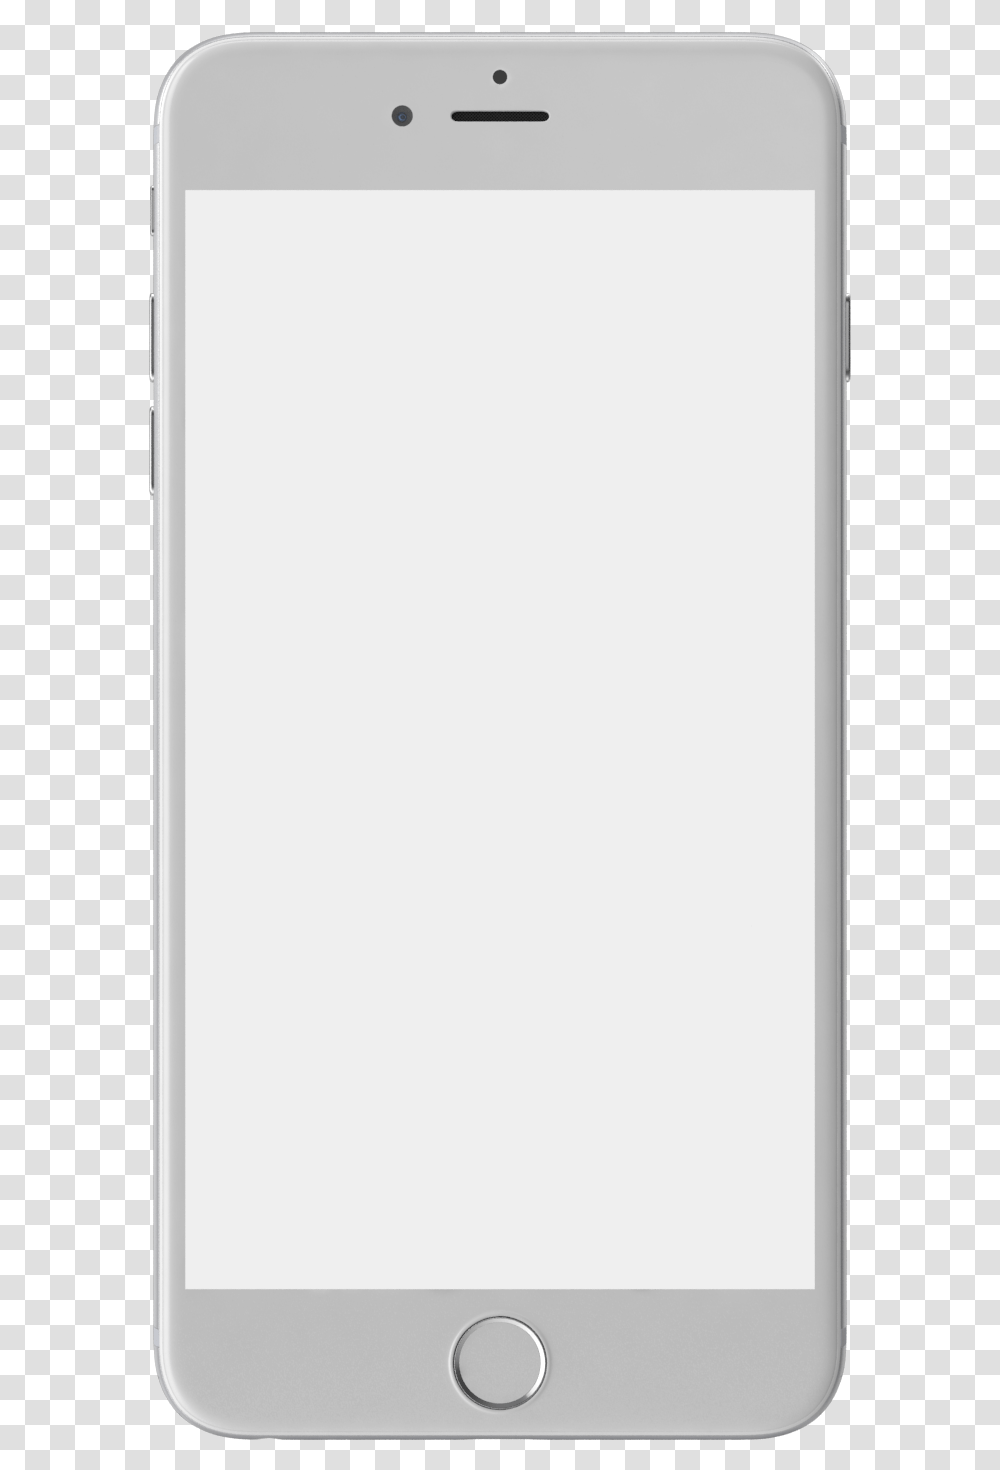 Iphone 6 Plus Silver Image Google Pixel Mockup, Electronics, Mobile Phone, Cell Phone, White Board Transparent Png